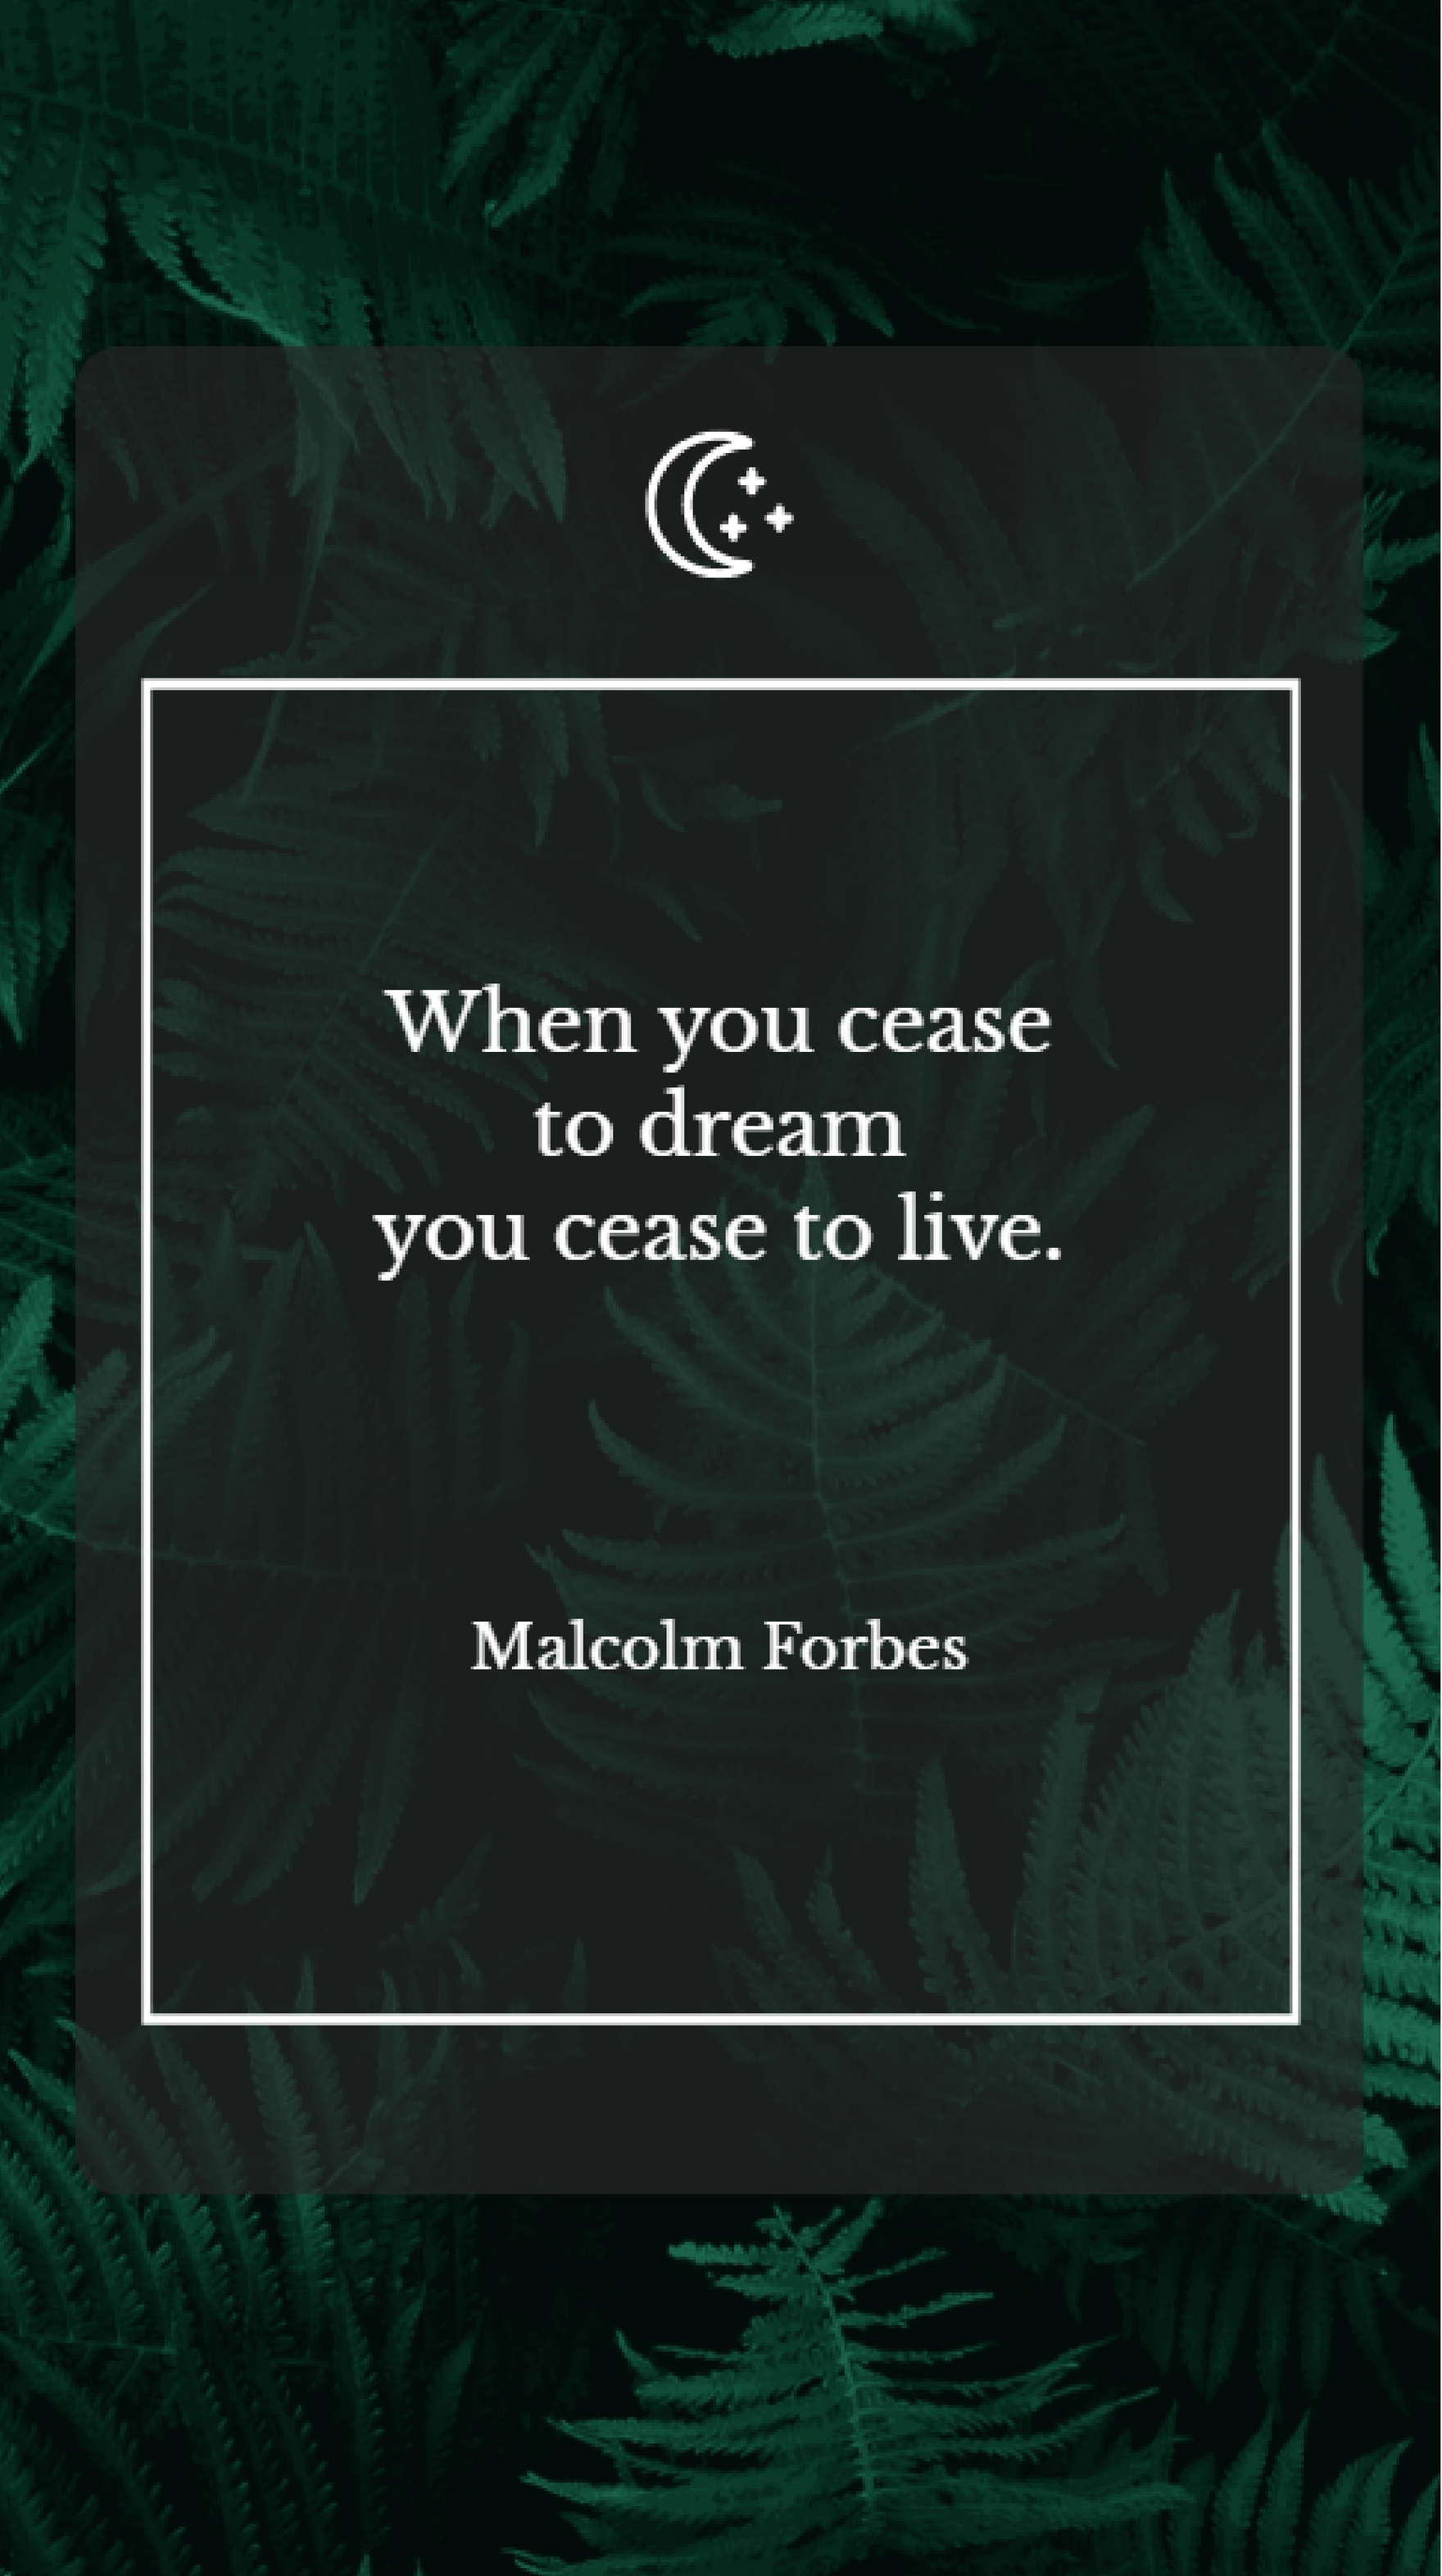 Malcolm Forbes - When you cease to dream you cease to live